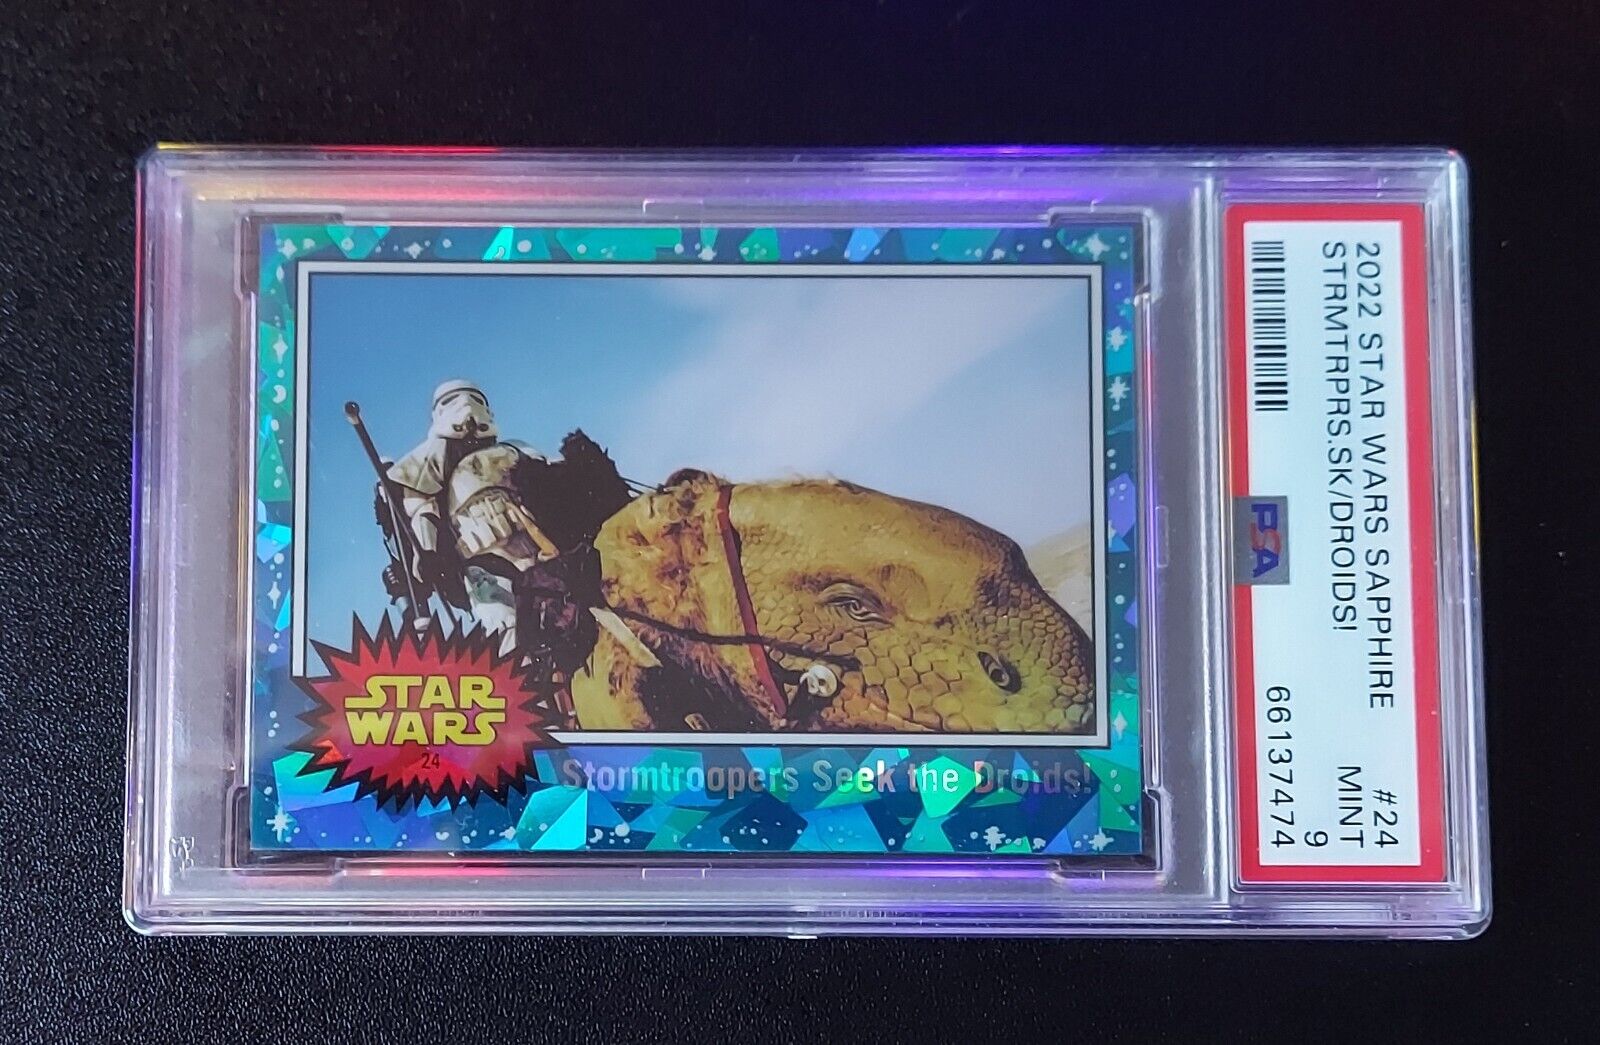 2022 Topps Chrome Star Wars Stormtroopers seed the Droids #24 PSA 9 MINT Vintage